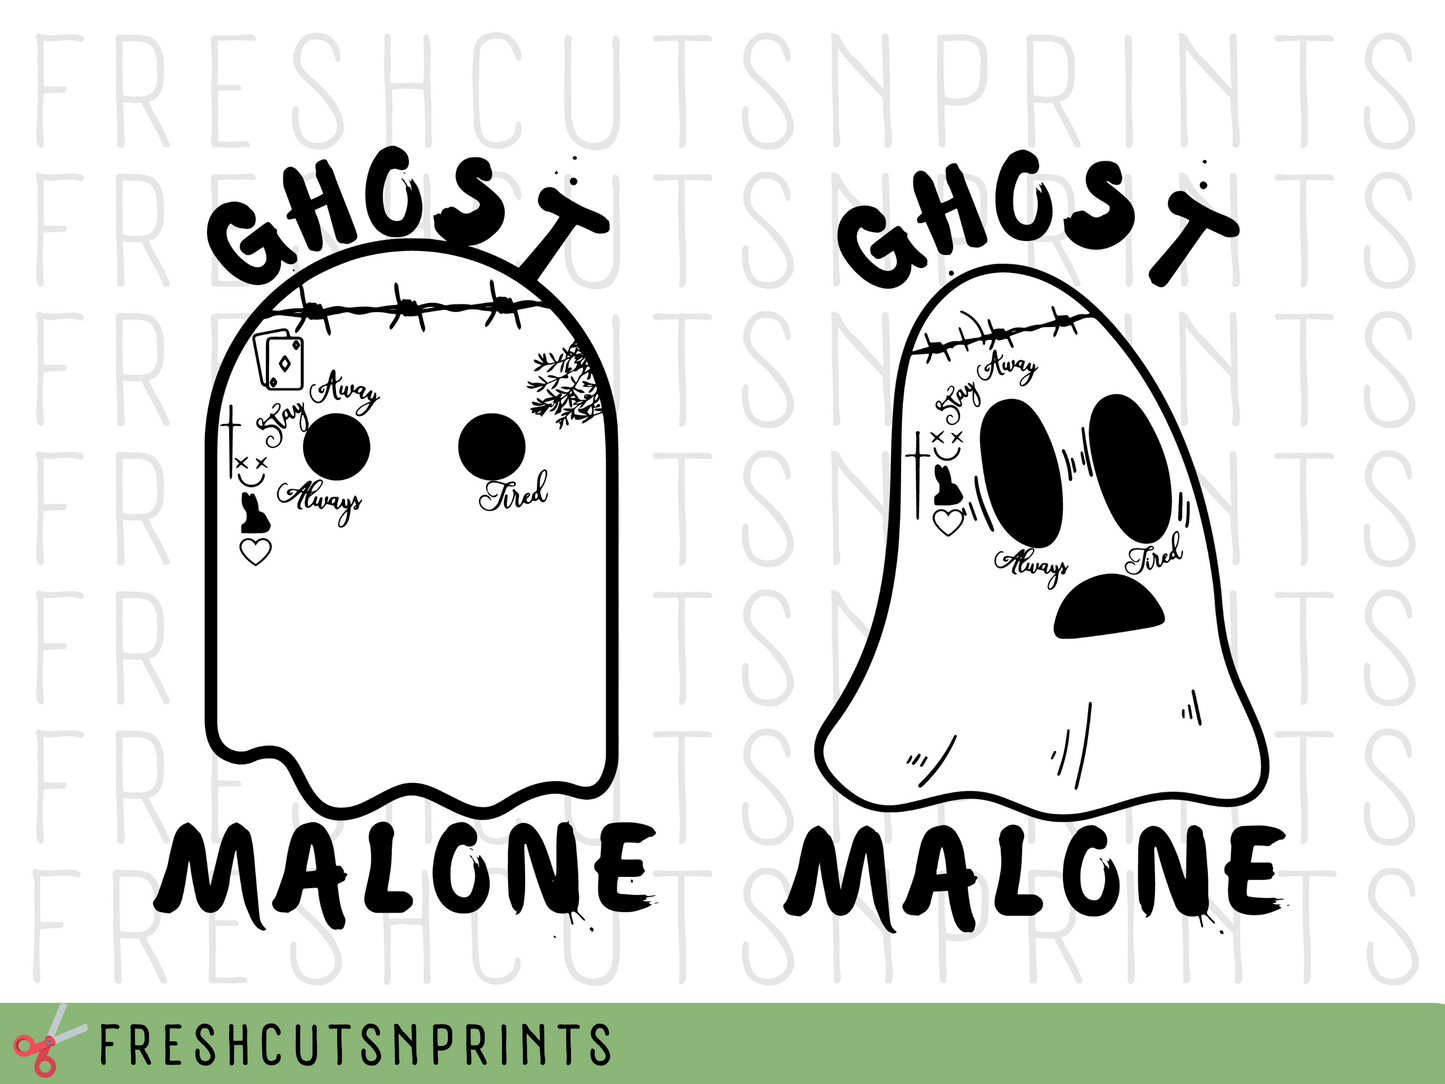 Ghost Malone SVG Designs, Funny Halloween Png, Instant Download, Ghost Malone shirt design, Trendy Halloween svg, SVG files for Cricut